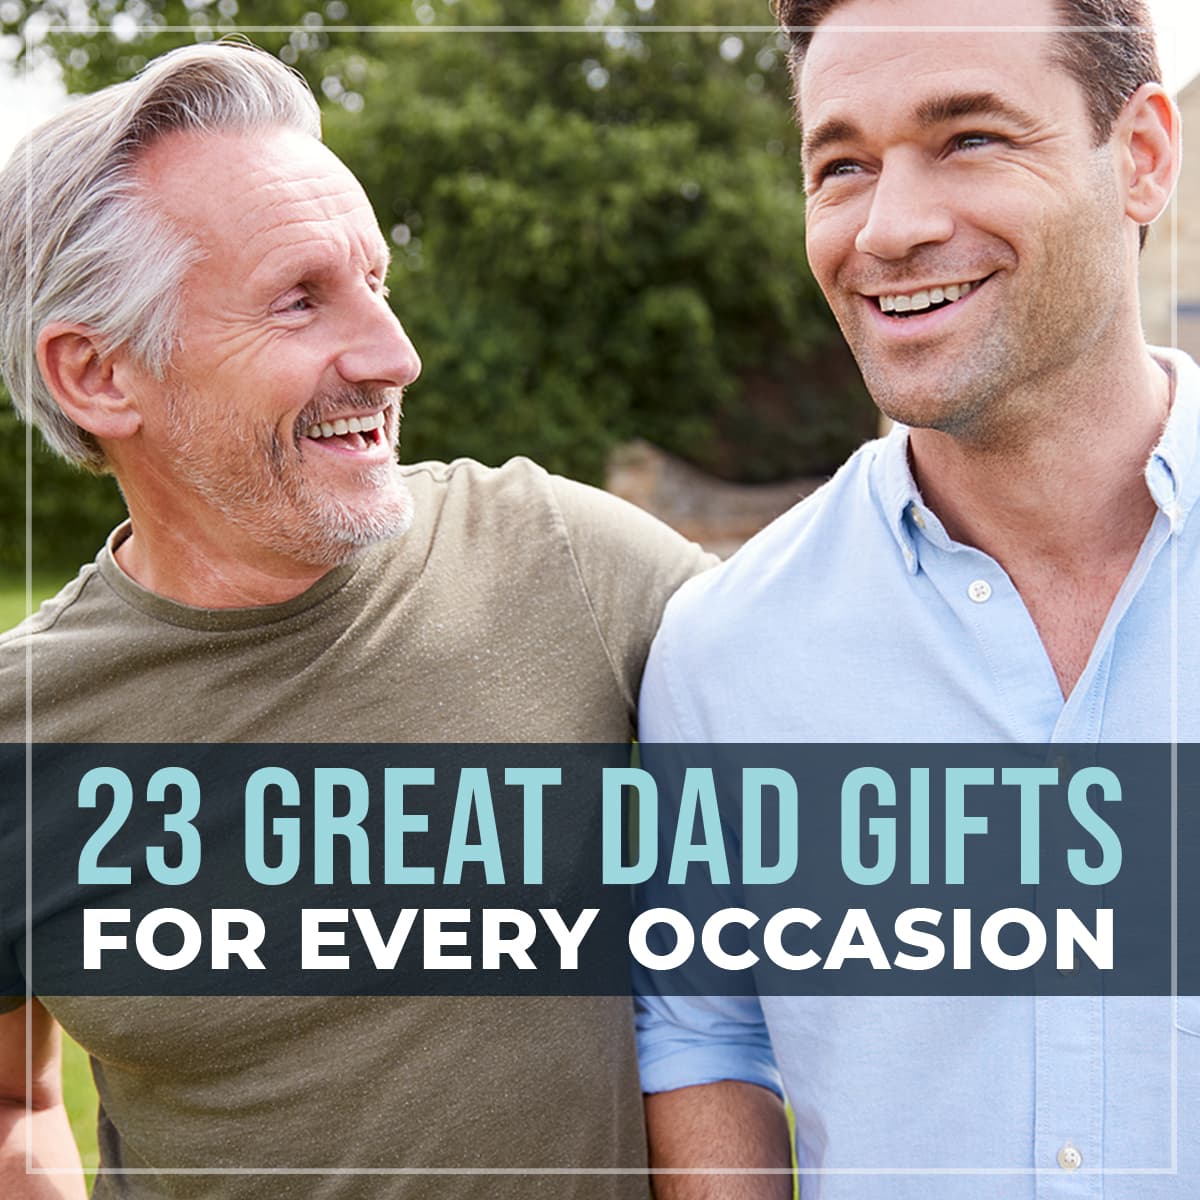 23 Great Dad Gifts for Every Occasion